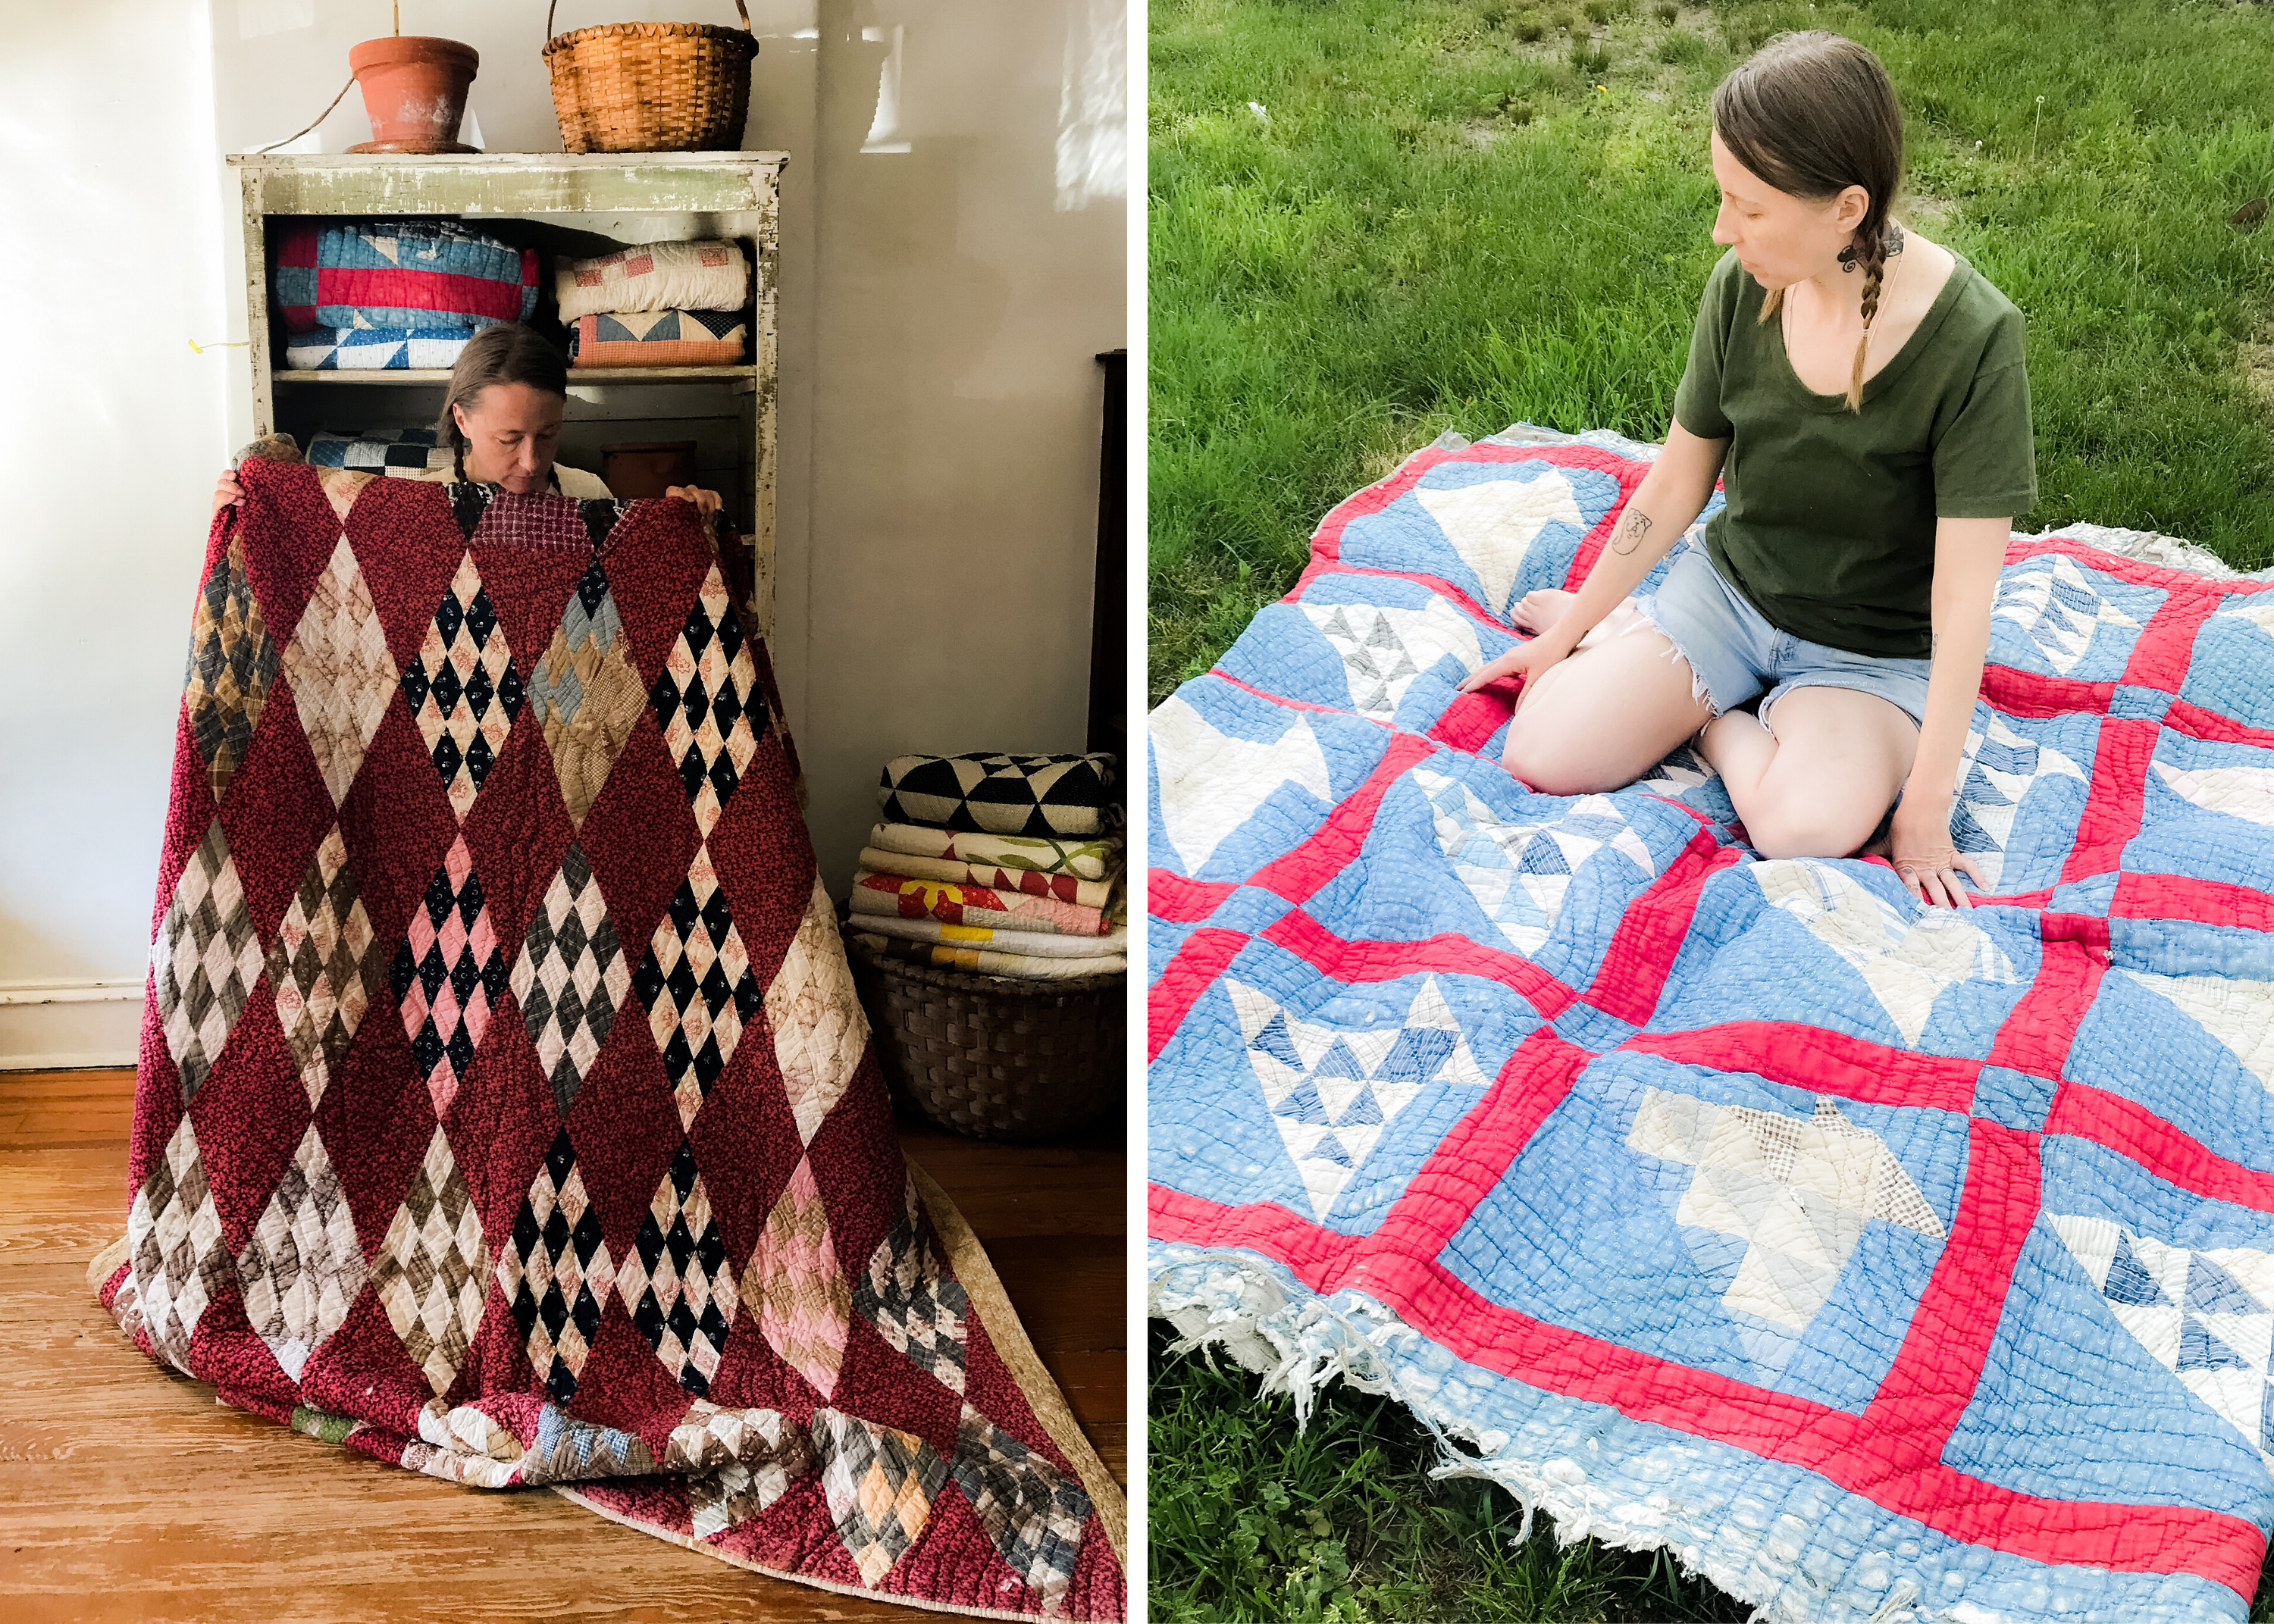 Tips For Finding Great Second-Hand Textiles from Stacy Jackson